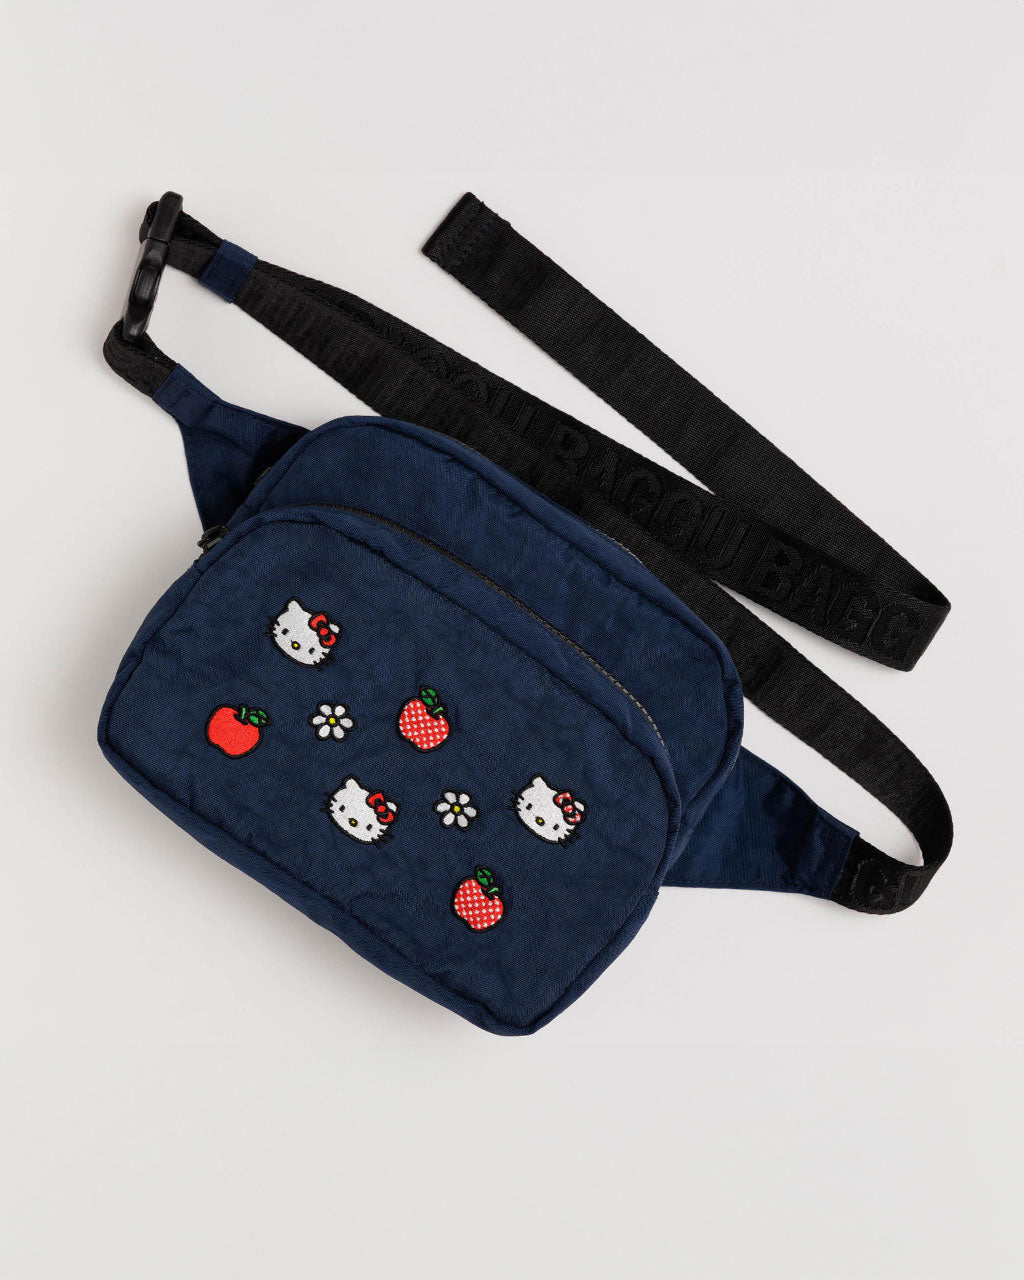 Fanny Pack - Embroidered Hello Kitty Apple – ban.do